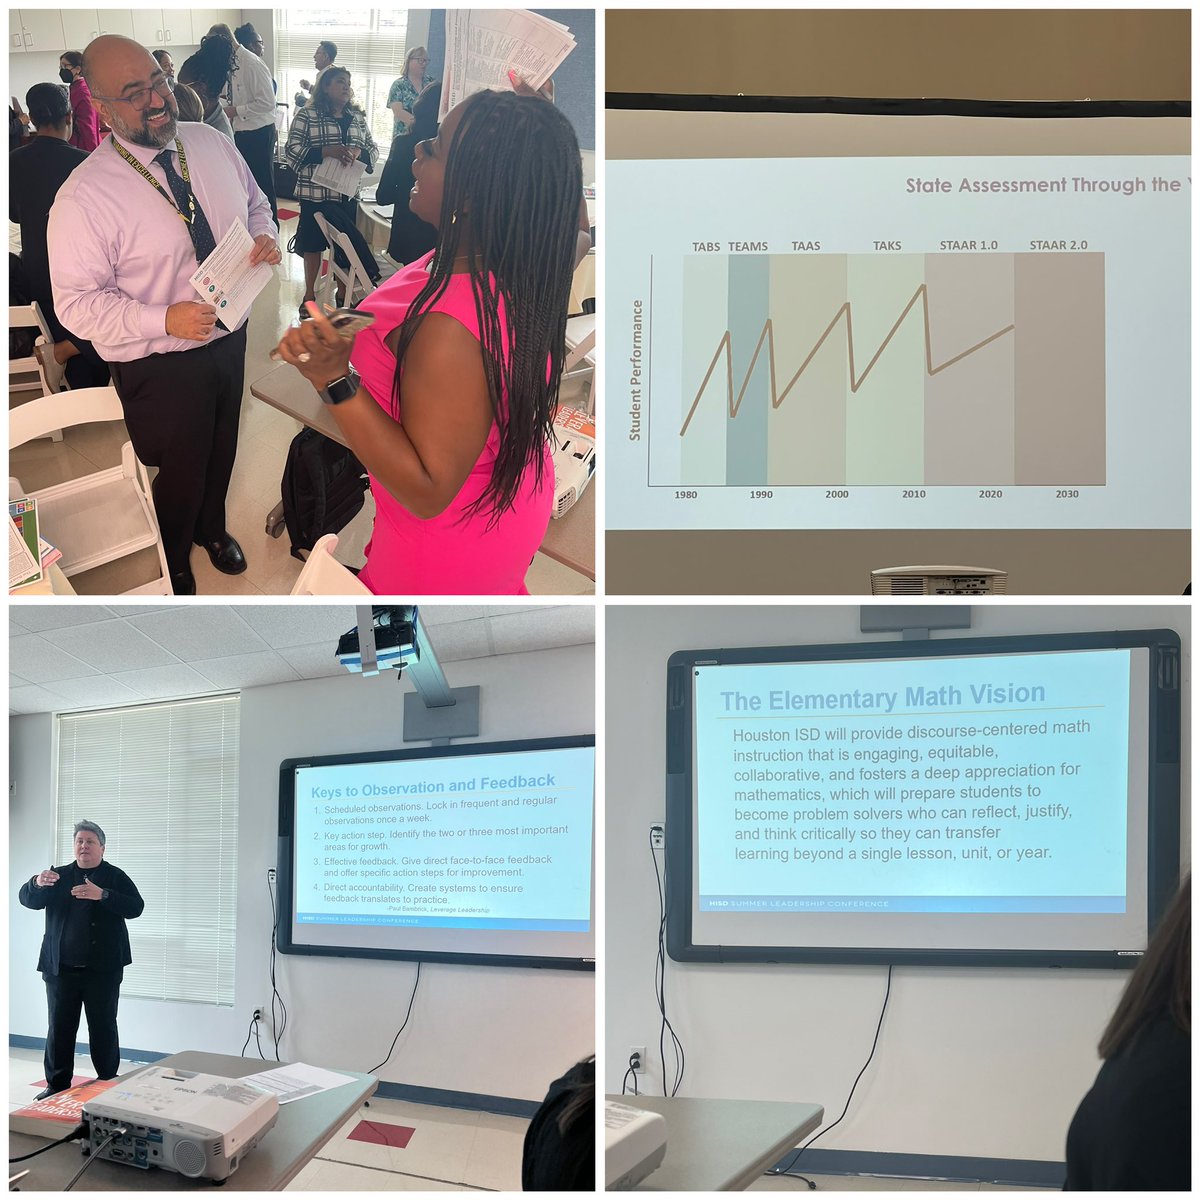 Enjoyed diving into the learning and collaboration on Day 1 of the Summer Leadership Conference! @HISD_ElemMath @HoustonISD @tfox015 #GameChangers @HISD_ESO1